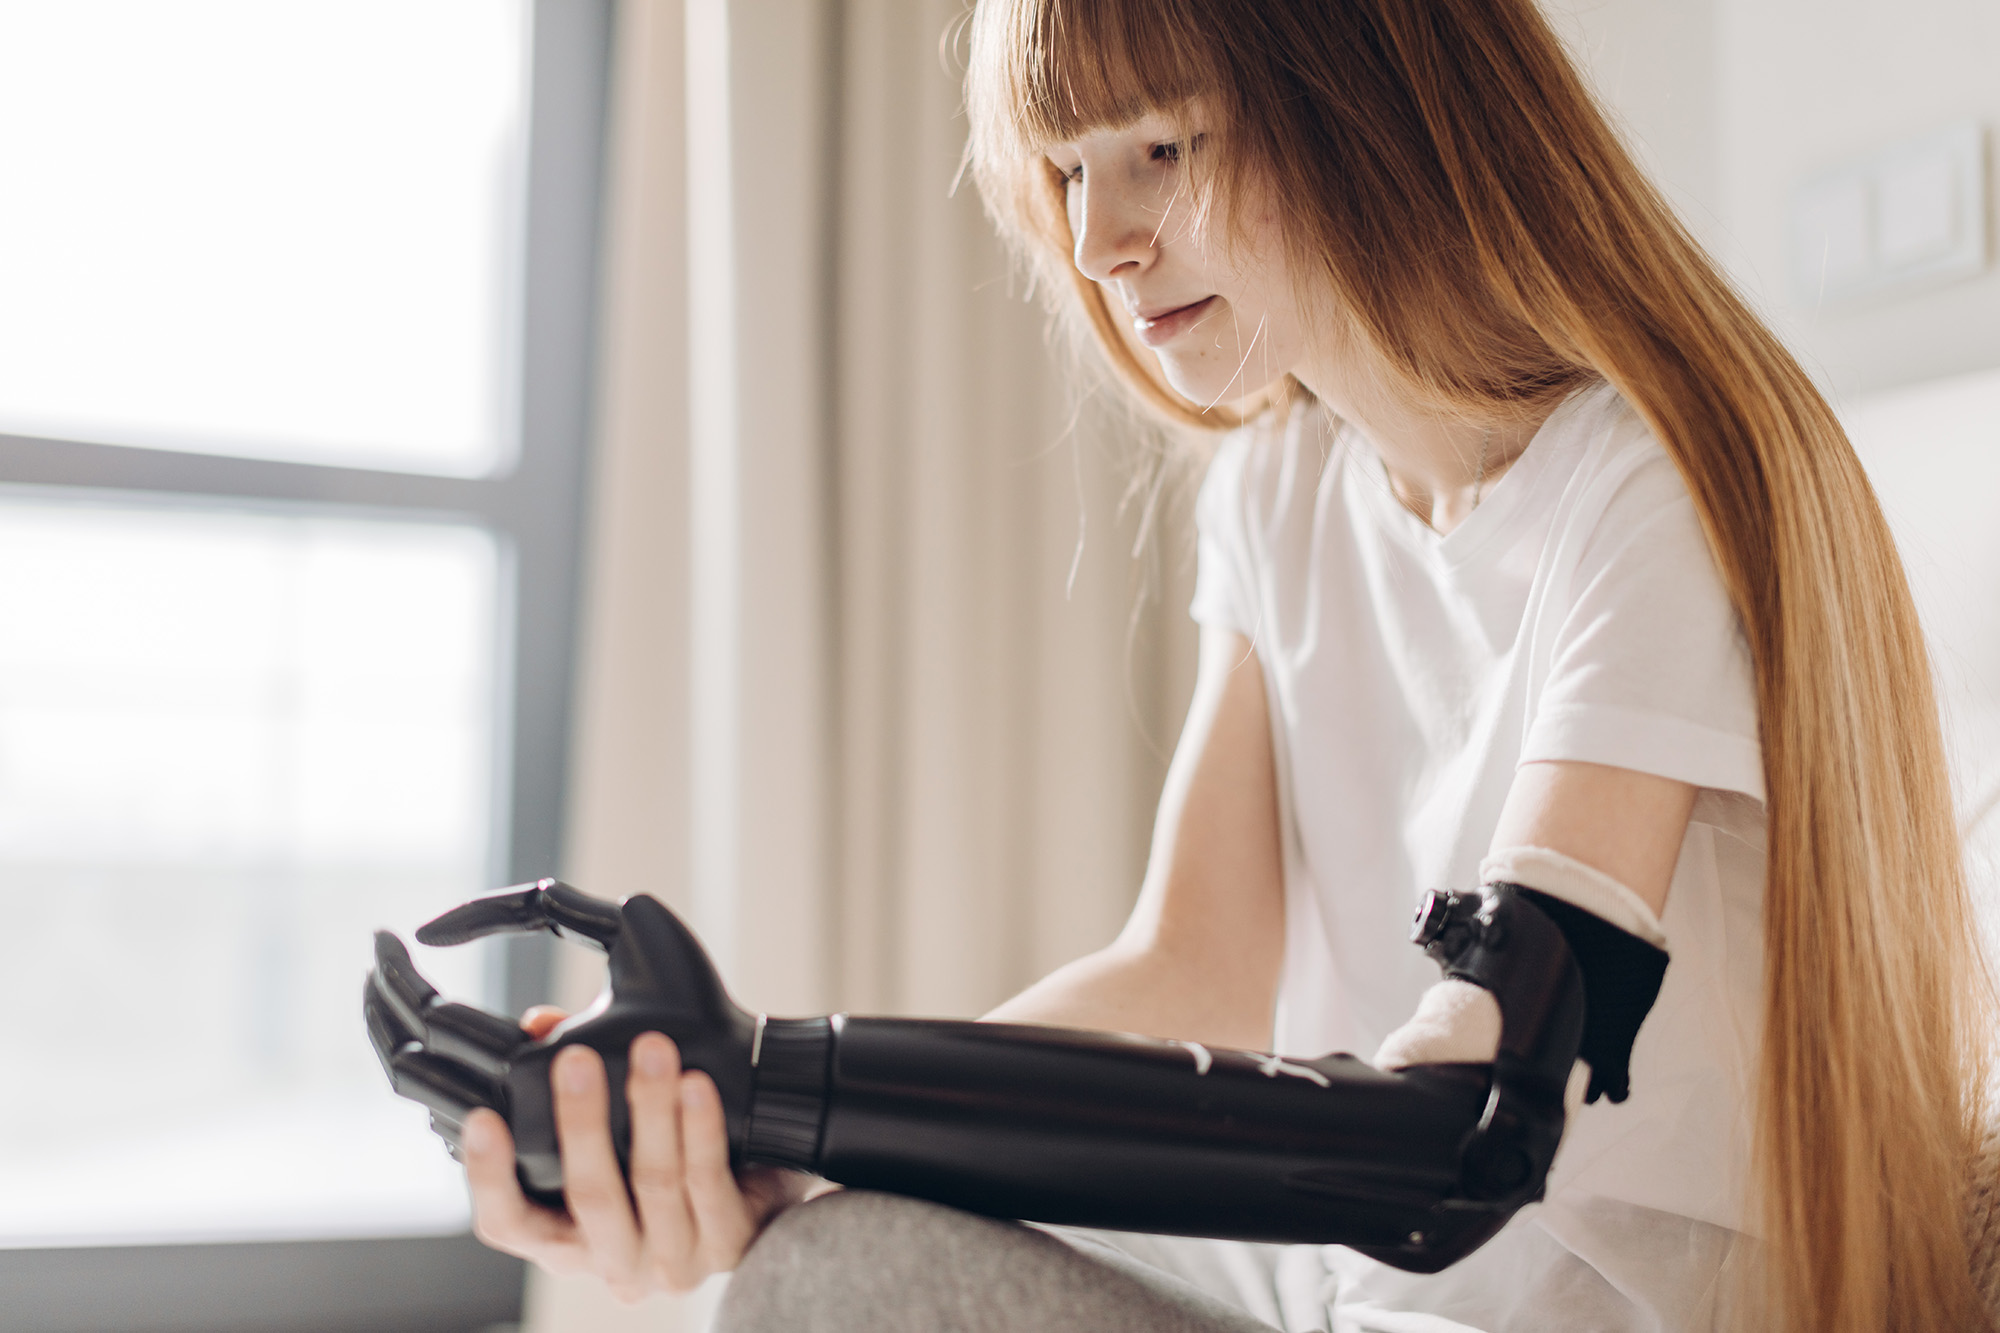 Prosthetic Arm - Limb Loss, Arm Injury, Lost hand, Injury Claims Wakefield